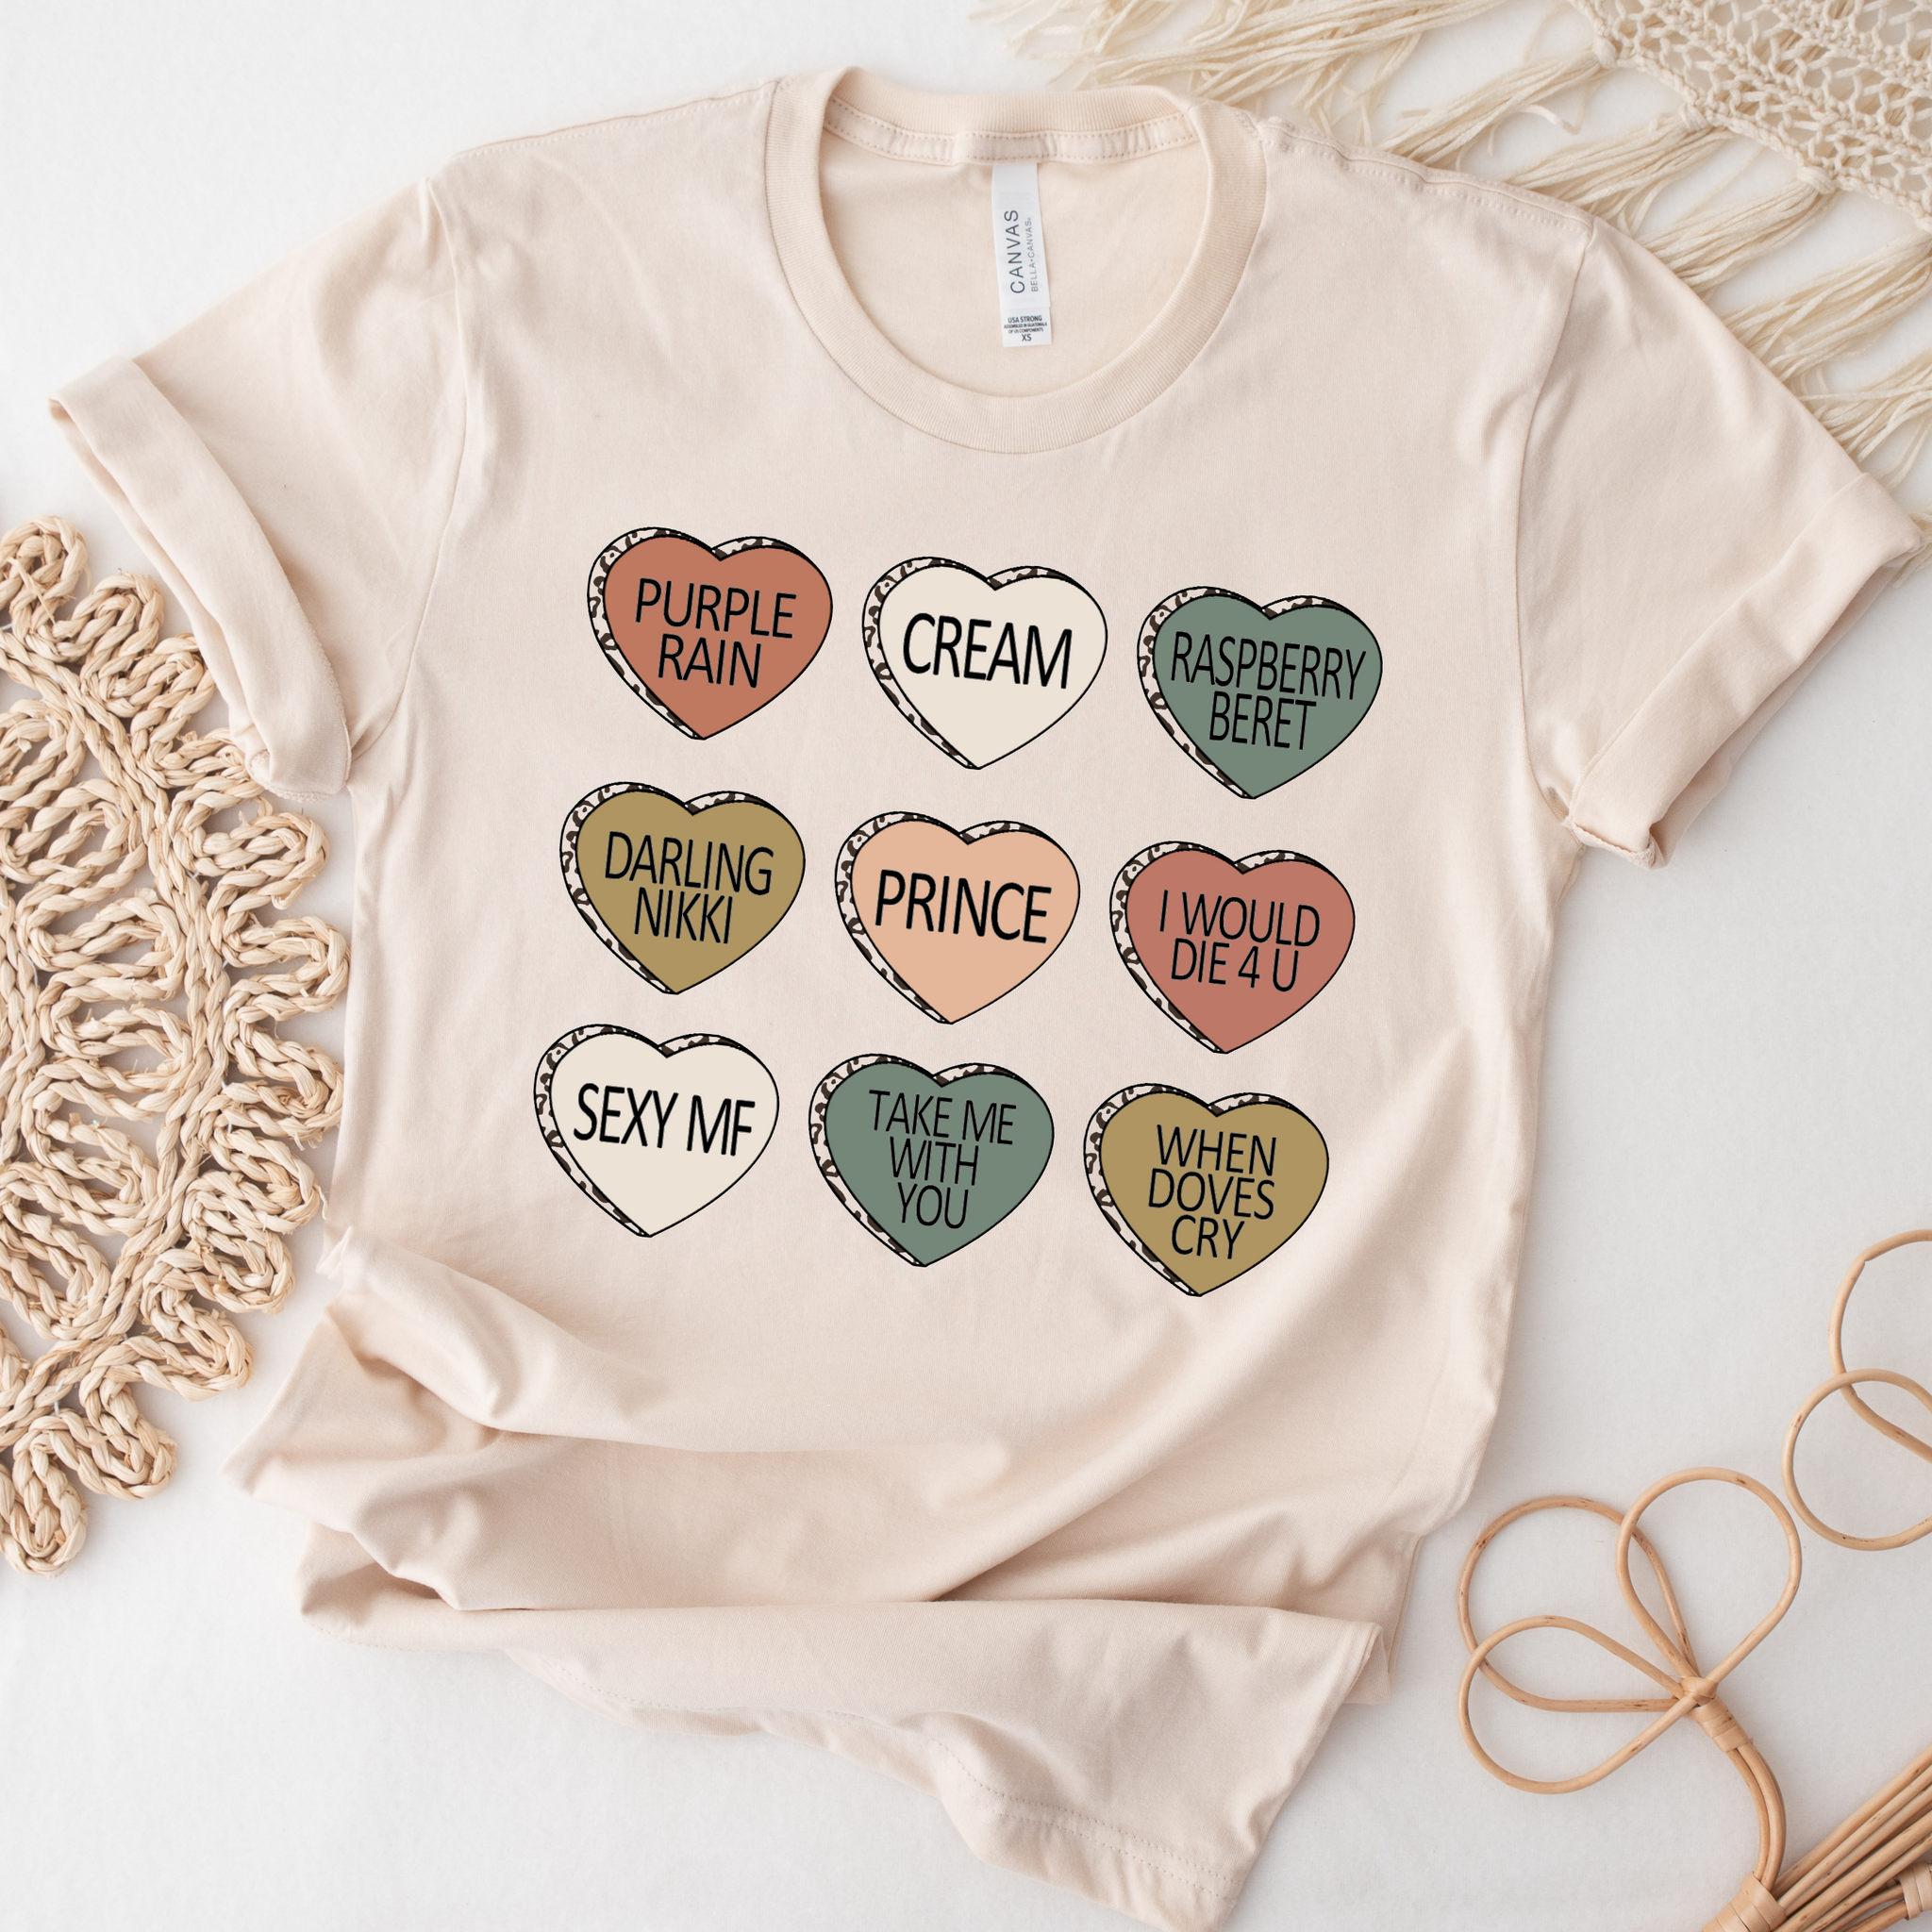 Prince Candy Hearts Top